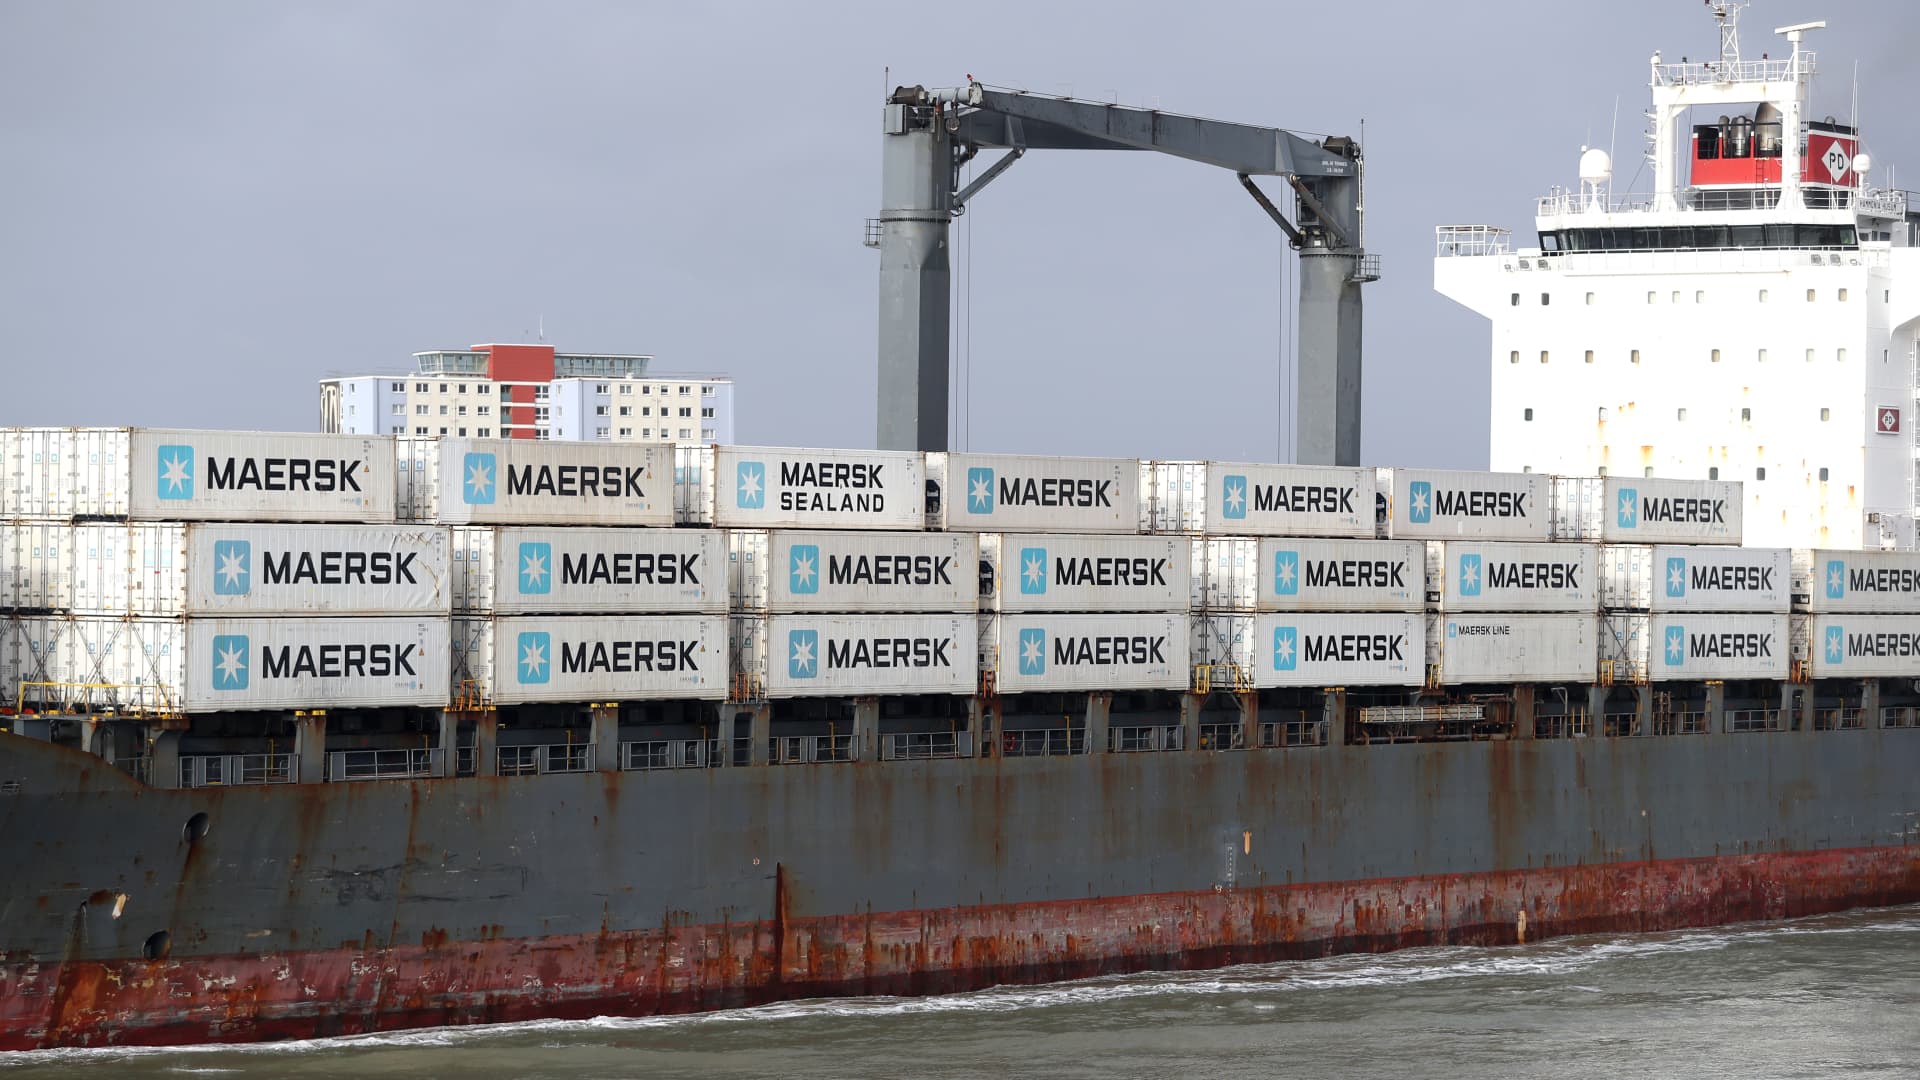 World’s largest container shipping firm Maersk, a barometer for global trade, warns of 'dark clouds on the horizon'